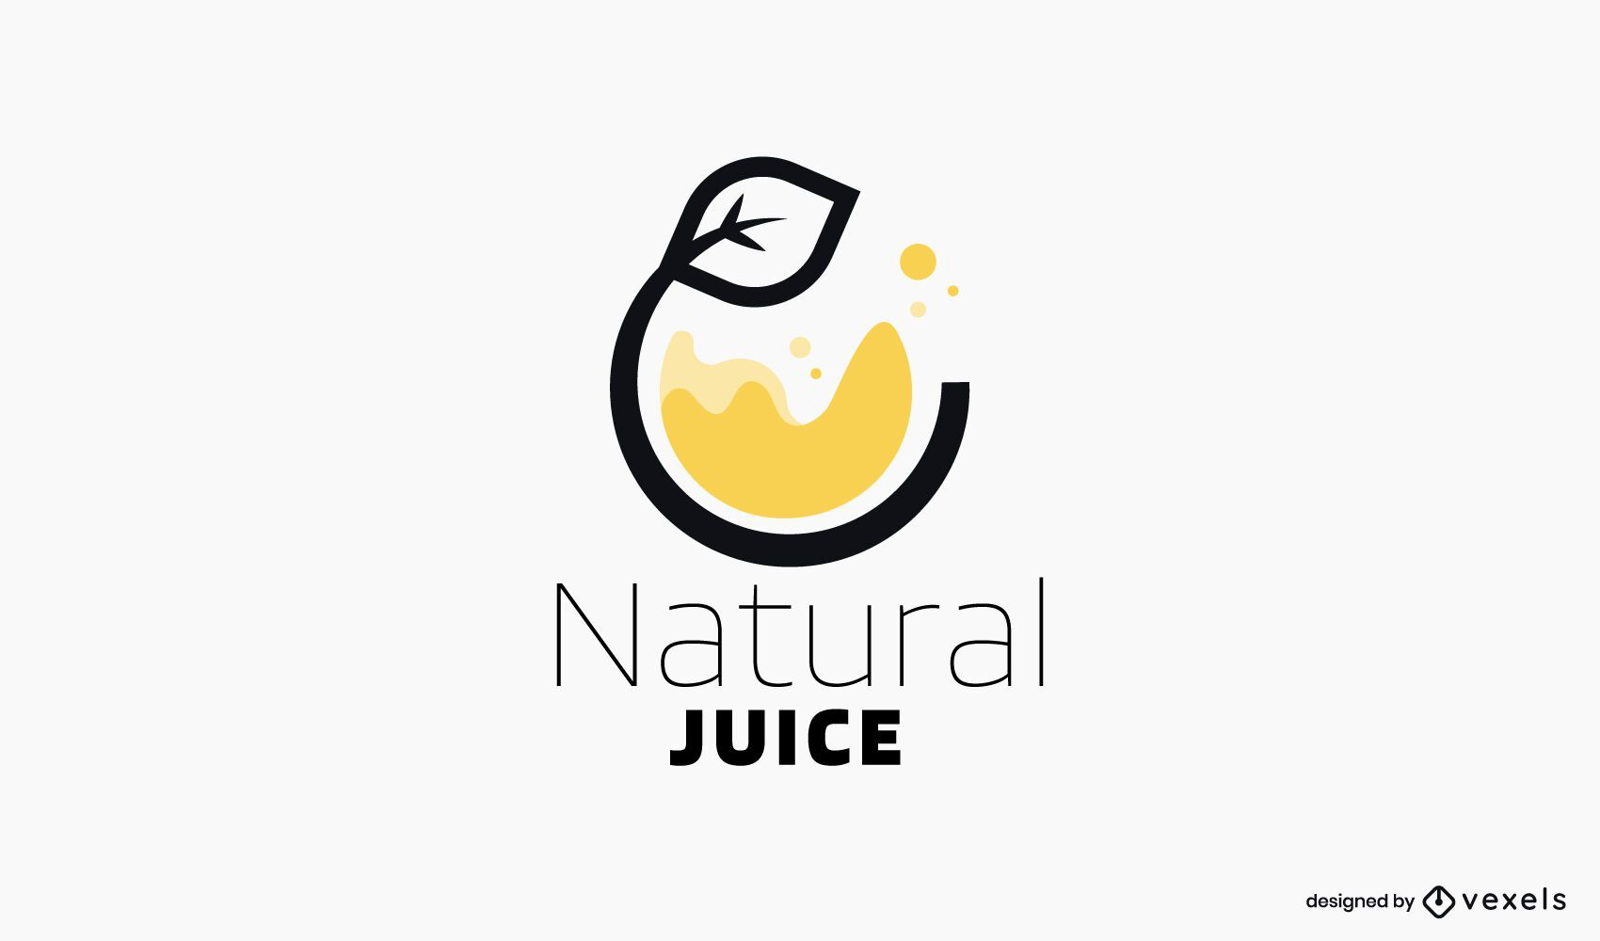 Logo Design Template Fresh Juice. Vector Illustration Of Icon Royalty Free  SVG, Cliparts, Vectors, and Stock Illustration. Image 67425388.